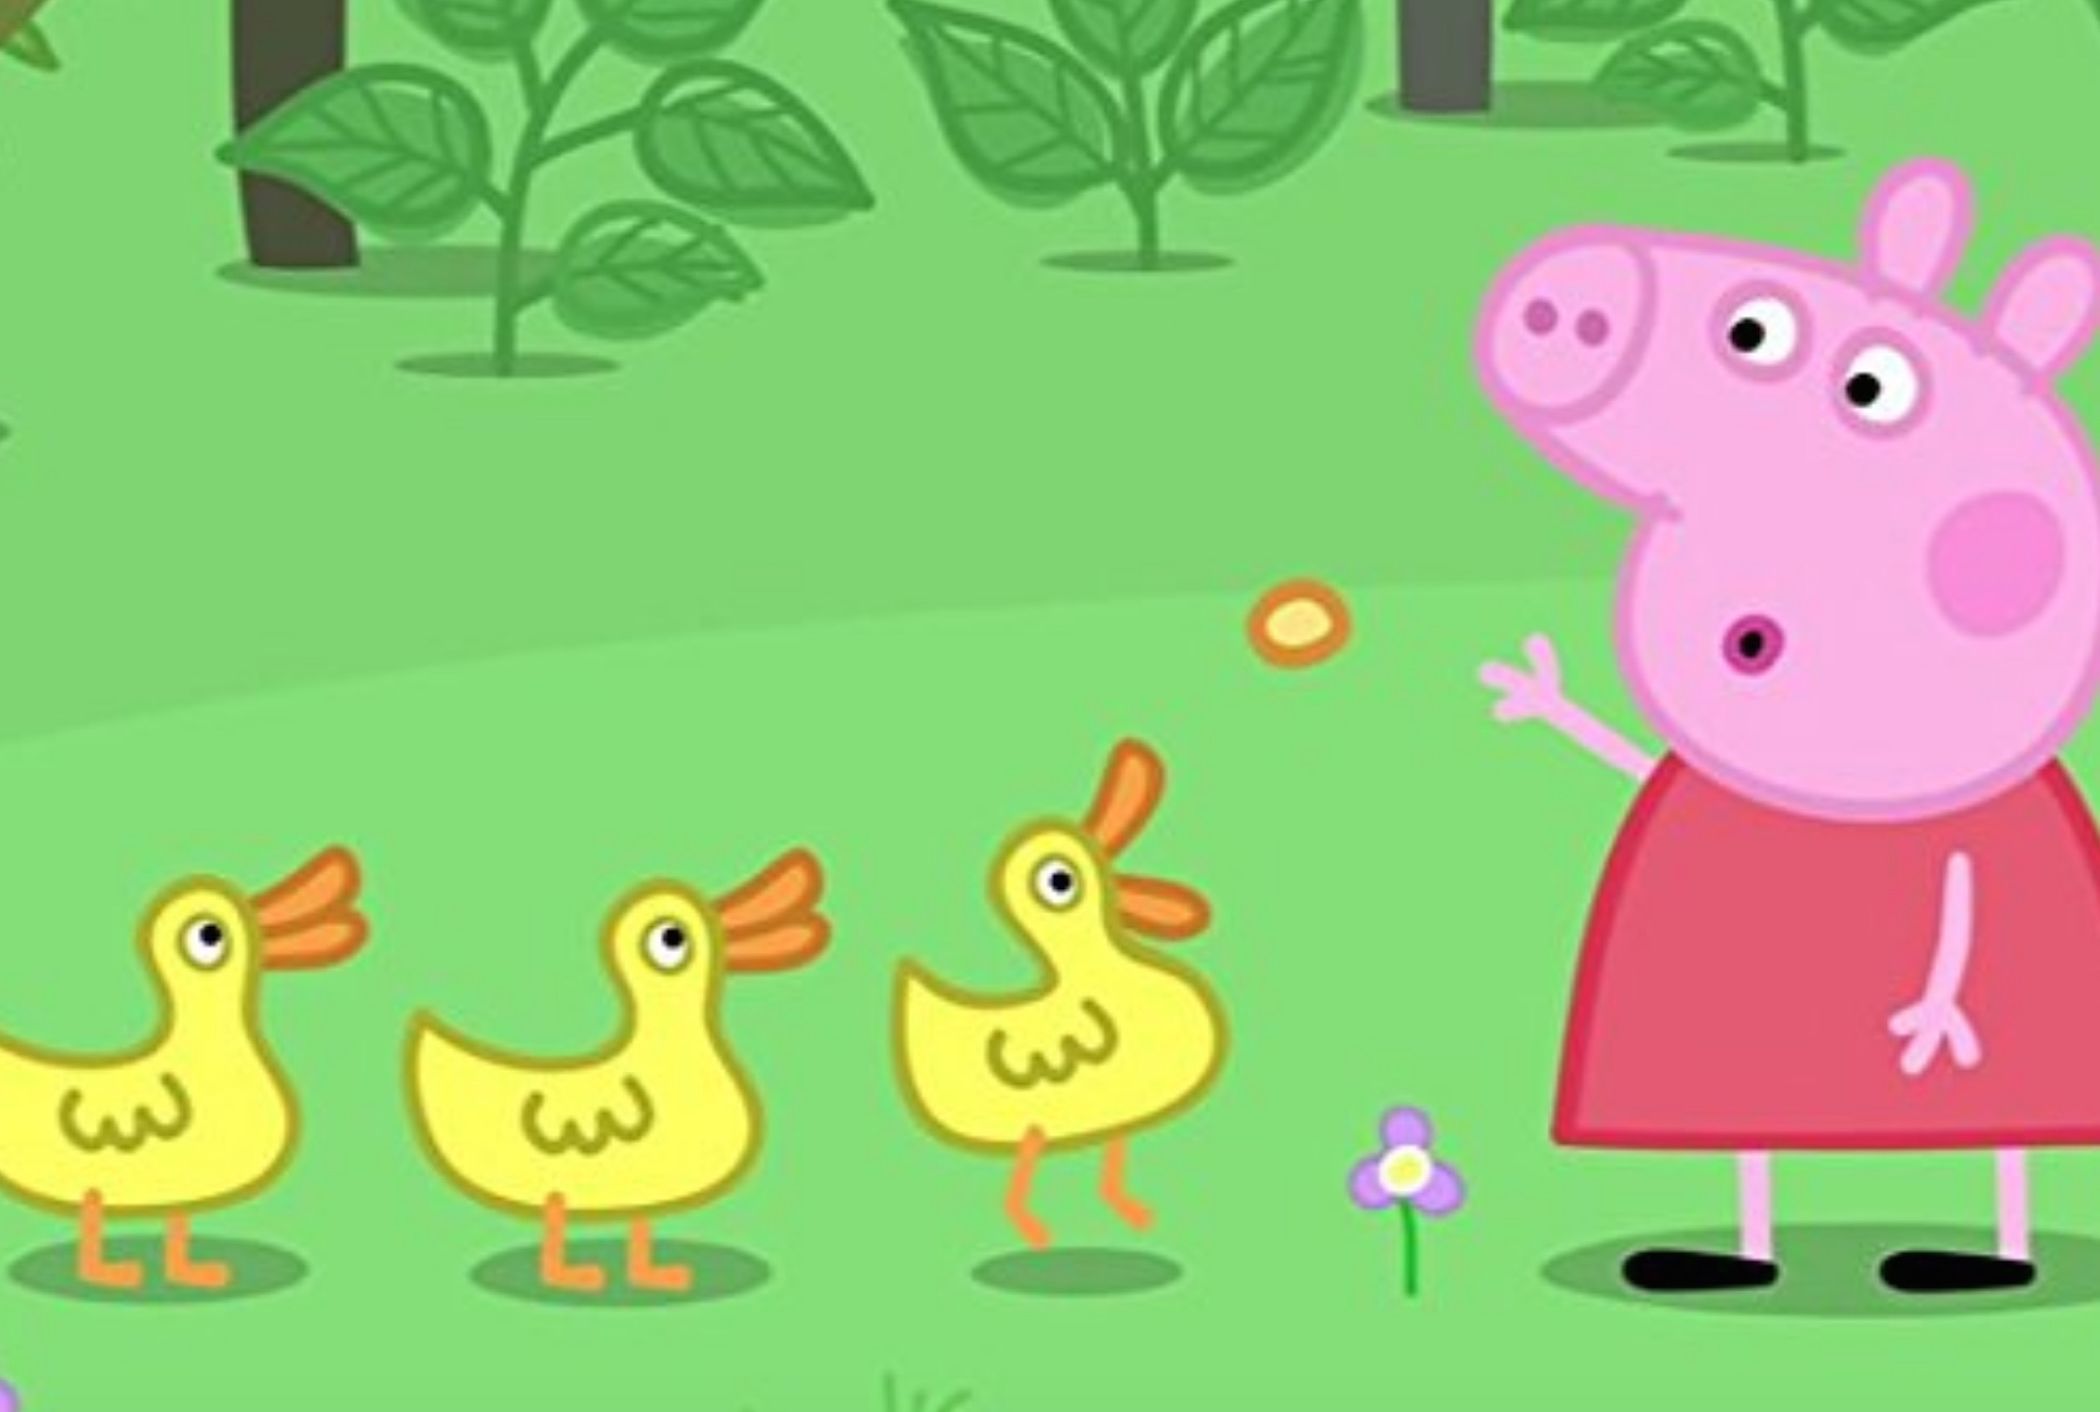 show me peppa pig episodes